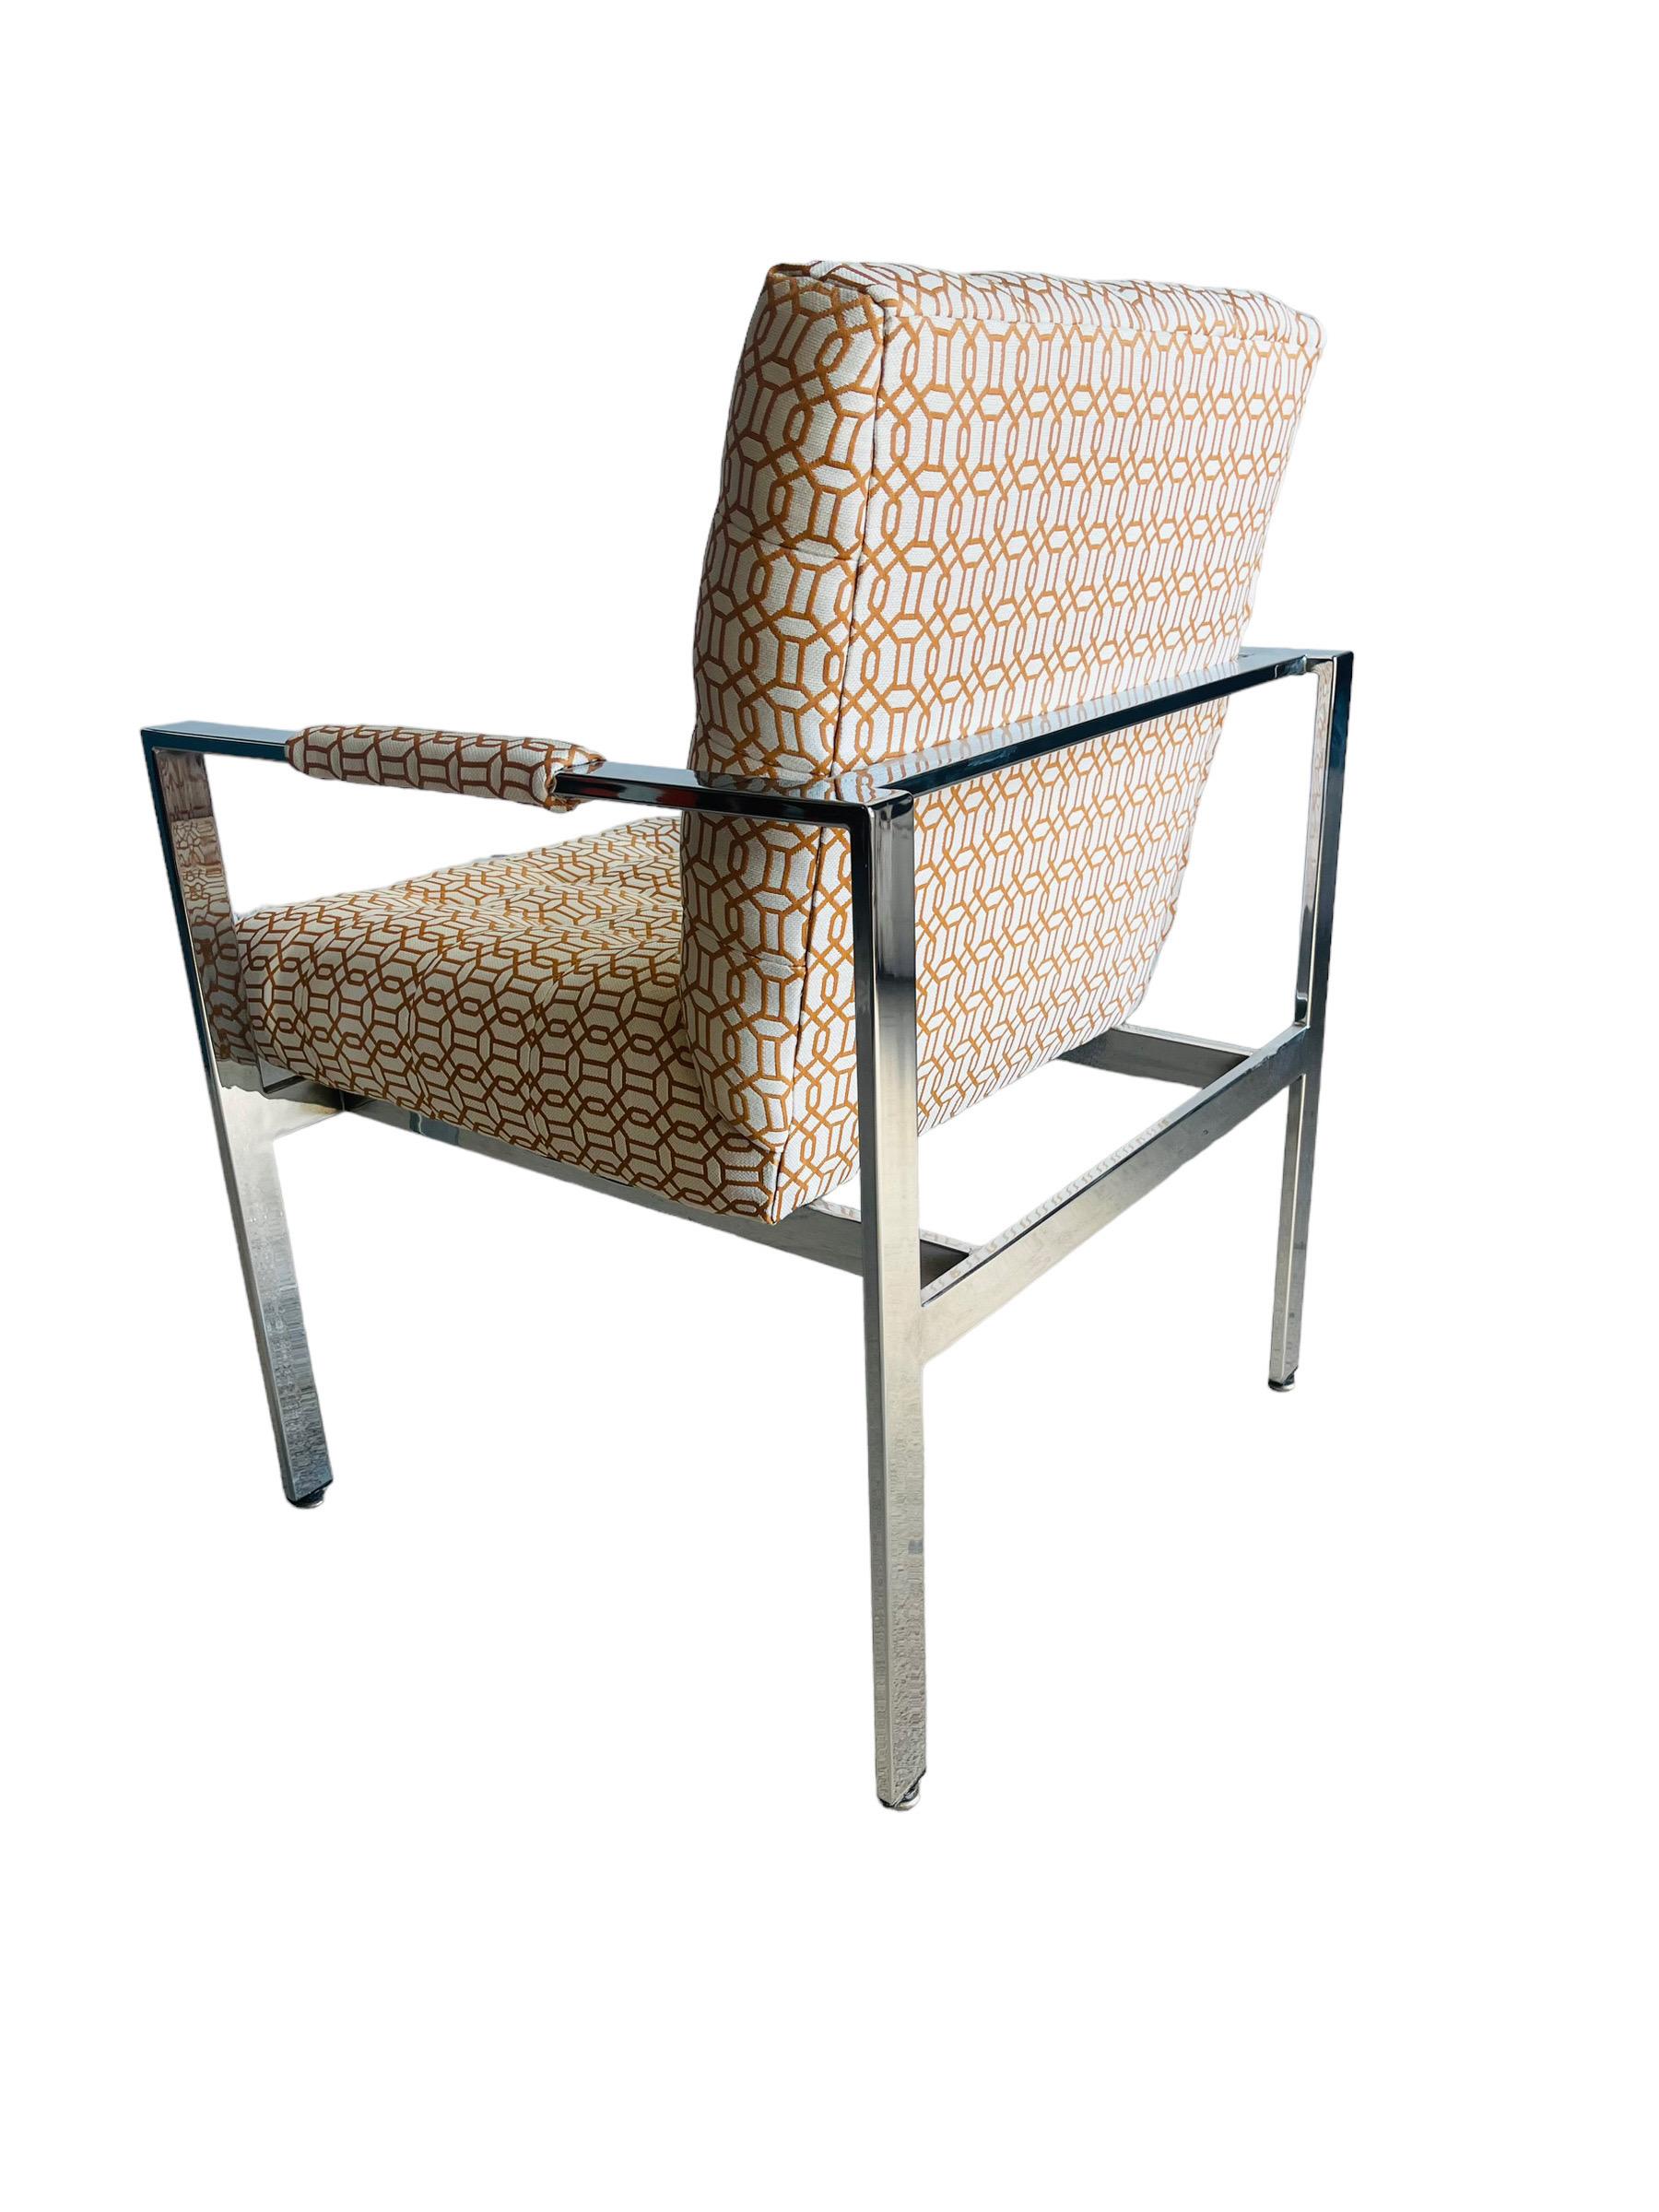 American Mid-Century Modern Chrome Lounge Chair / New Upholstery For Sale